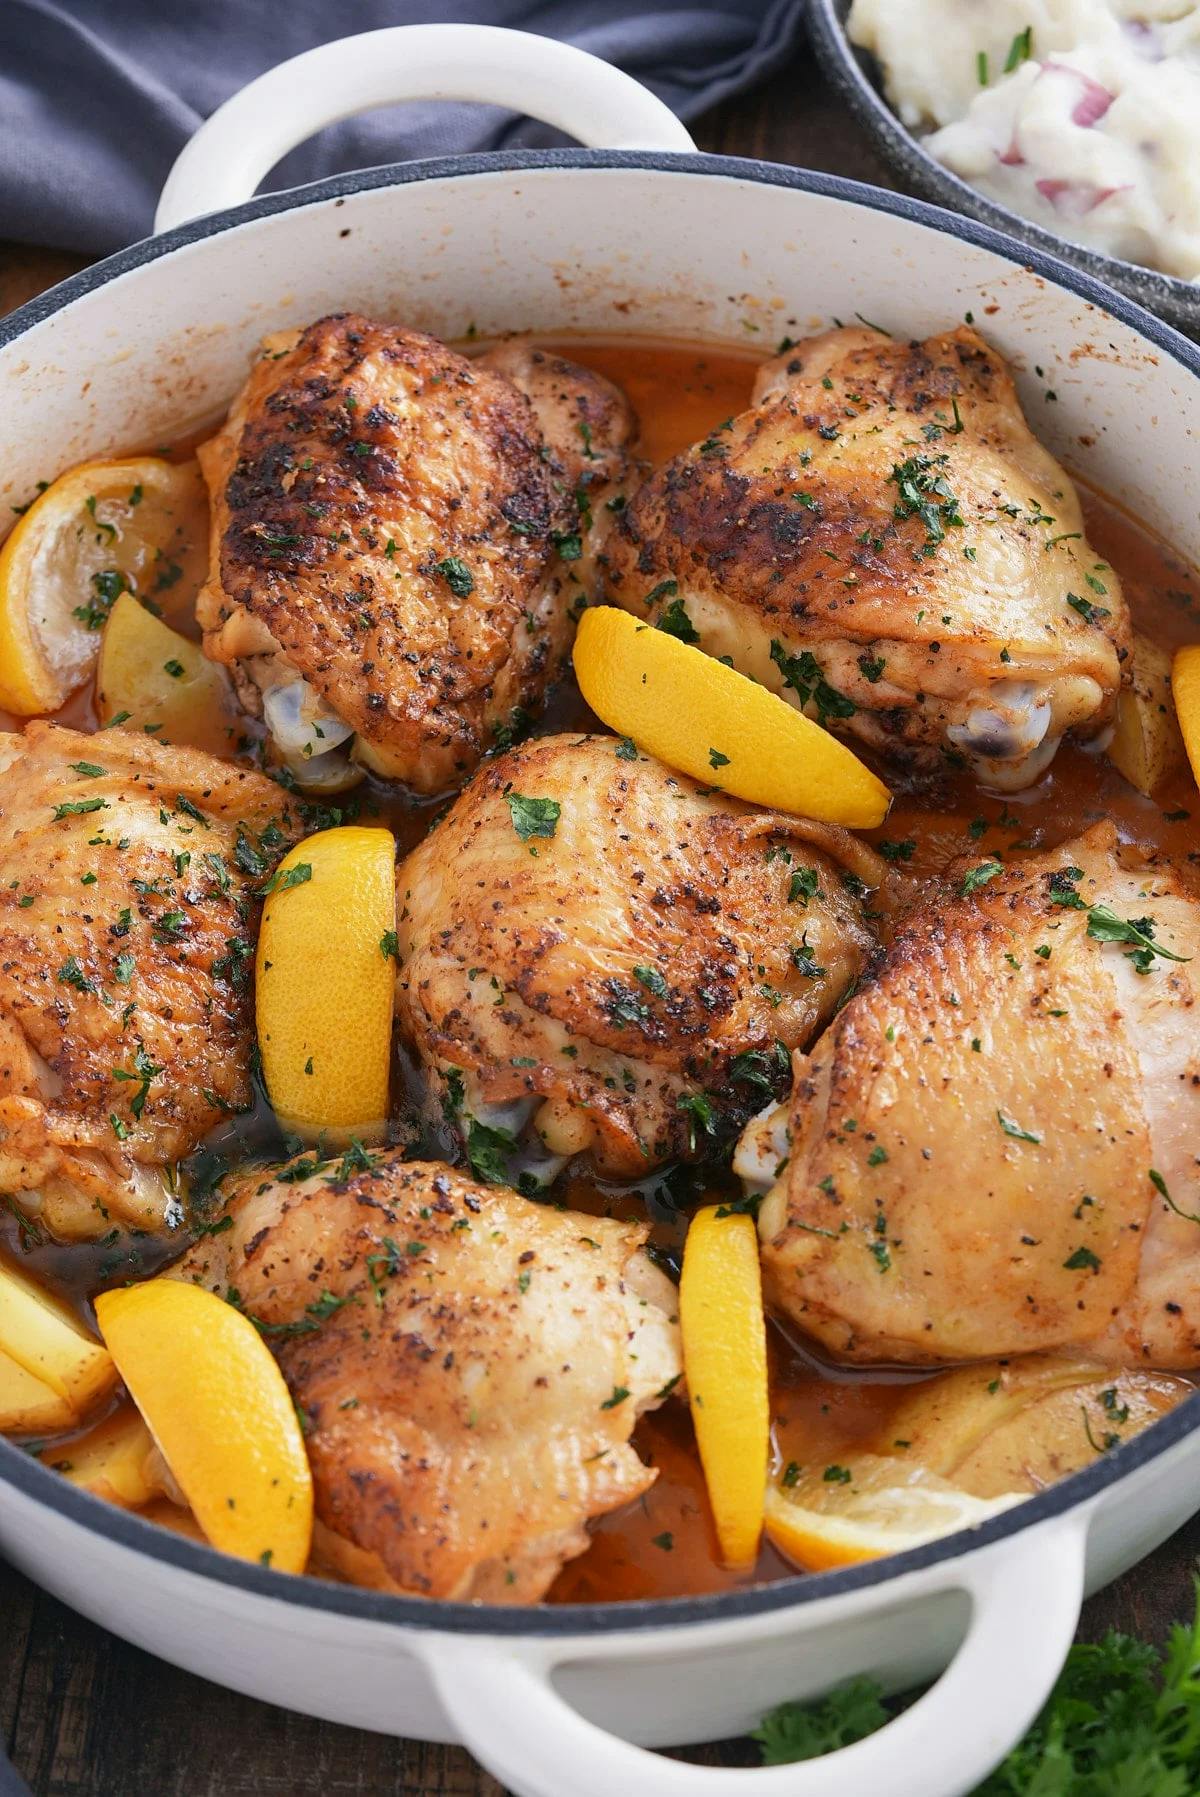 Braised chicken thighs with lemon